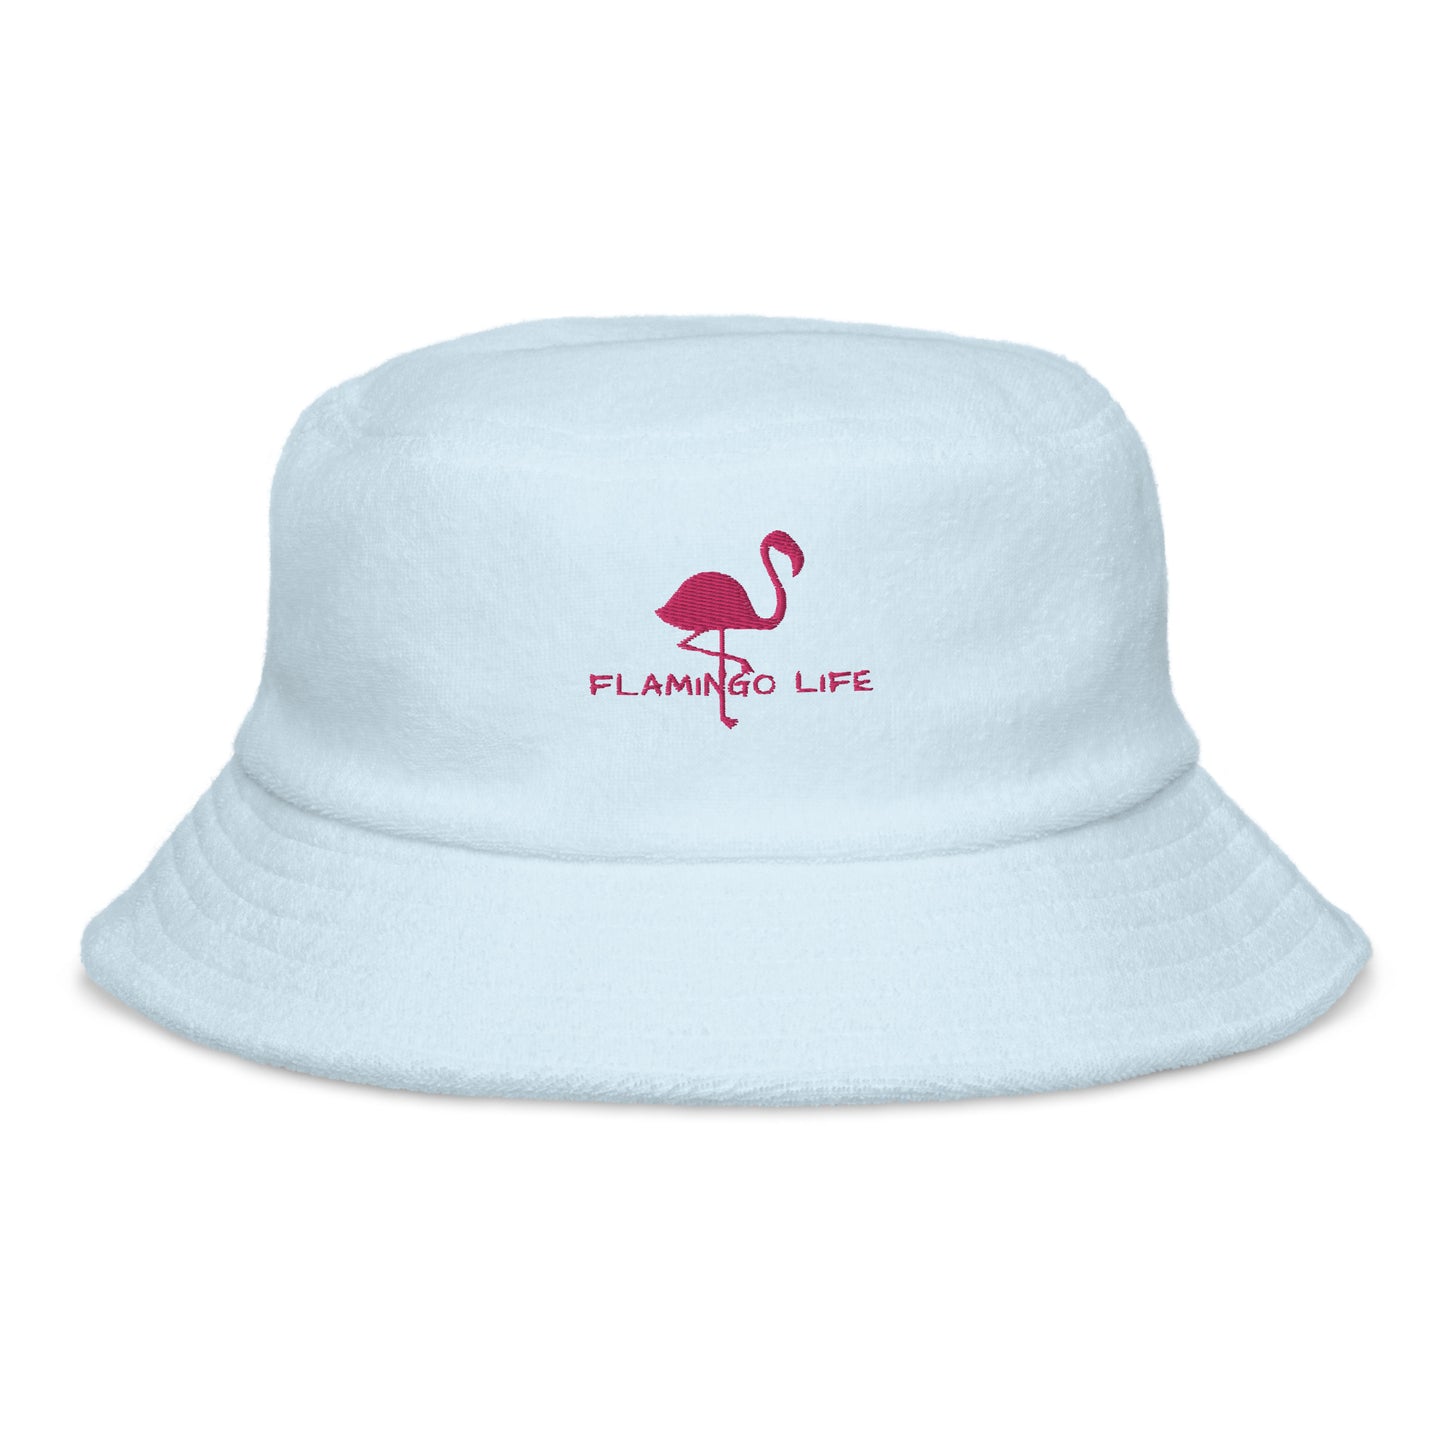 Flamingo Life® Embroidered Terry Cloth Bucket Hat (in 5 colors)